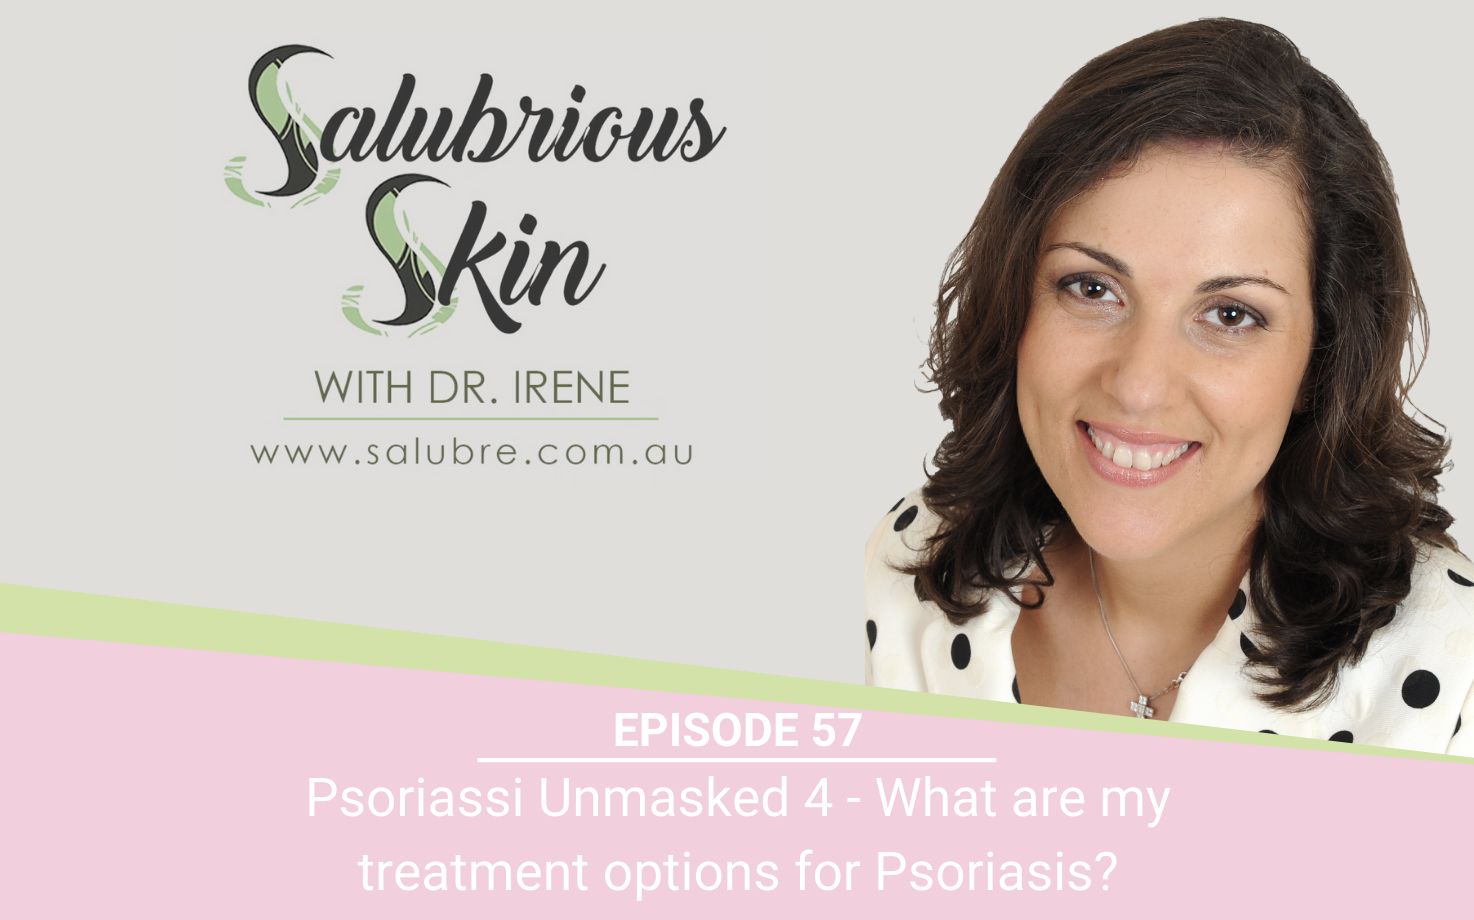 Podcast 57: Psoriasis Unmasked 4 - What are my treatment options in the management of psoriasis?